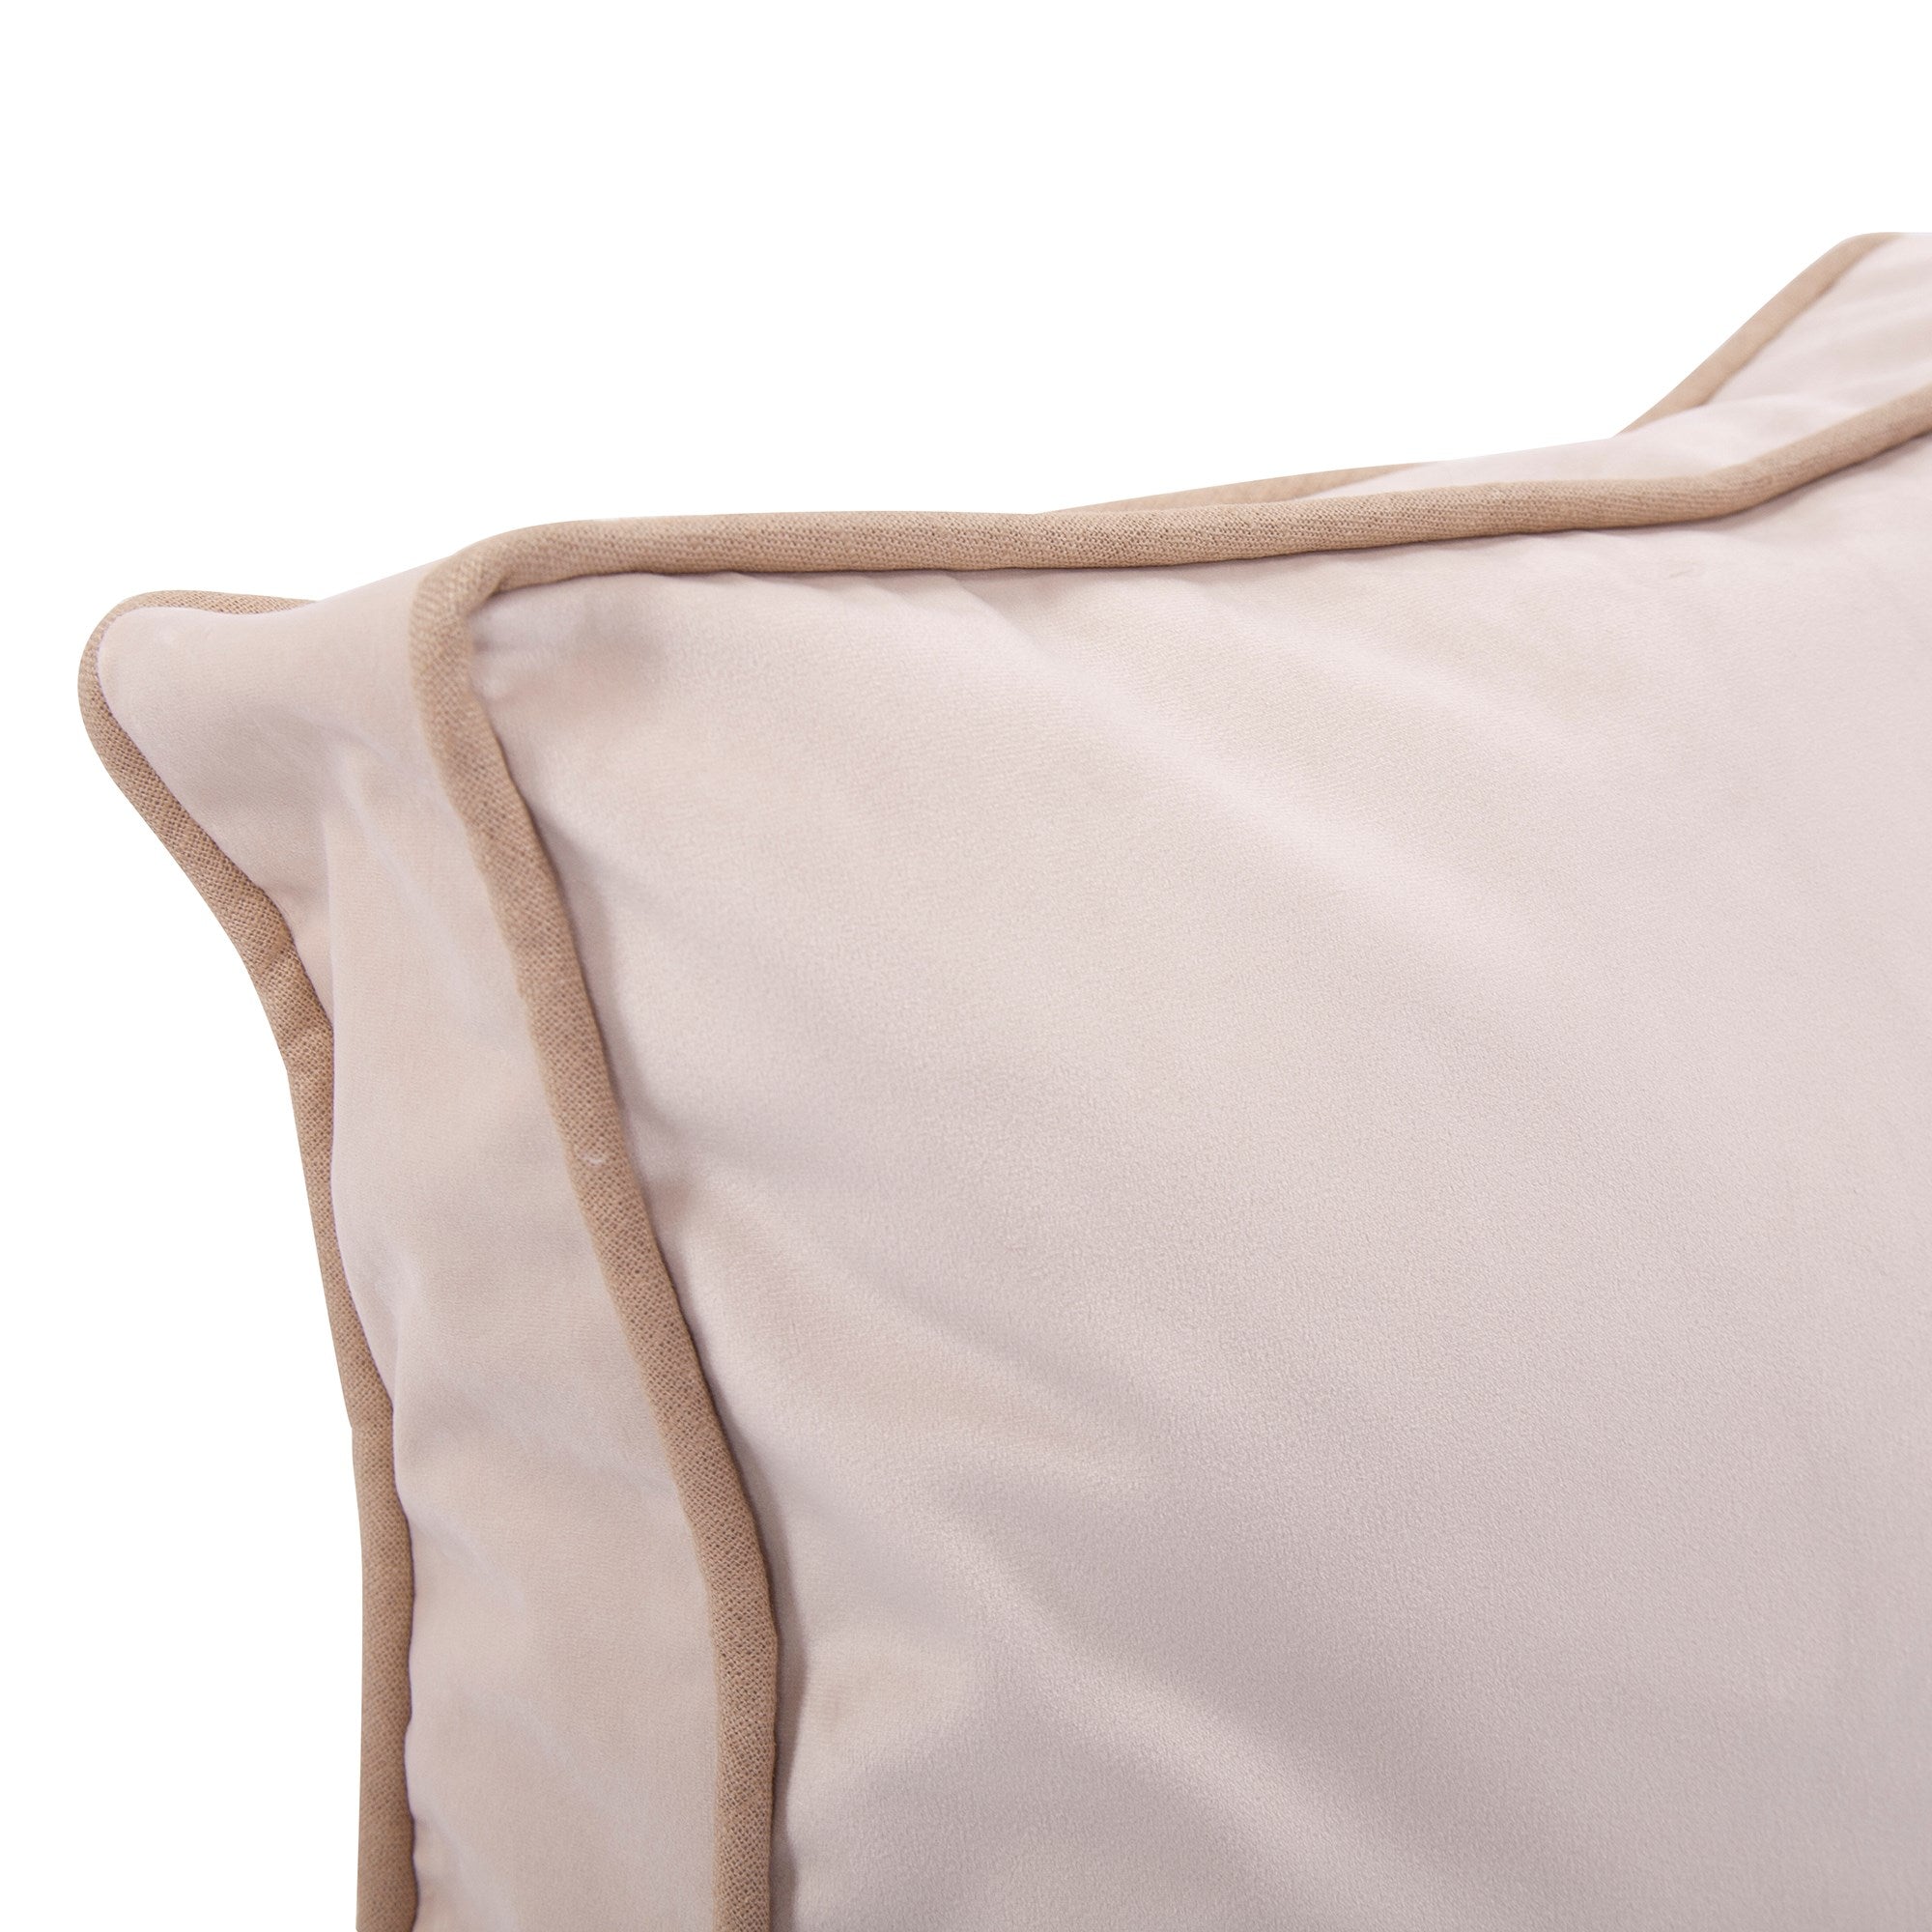 Gusseted Bella Sand Down Pillow- 20" x 20"